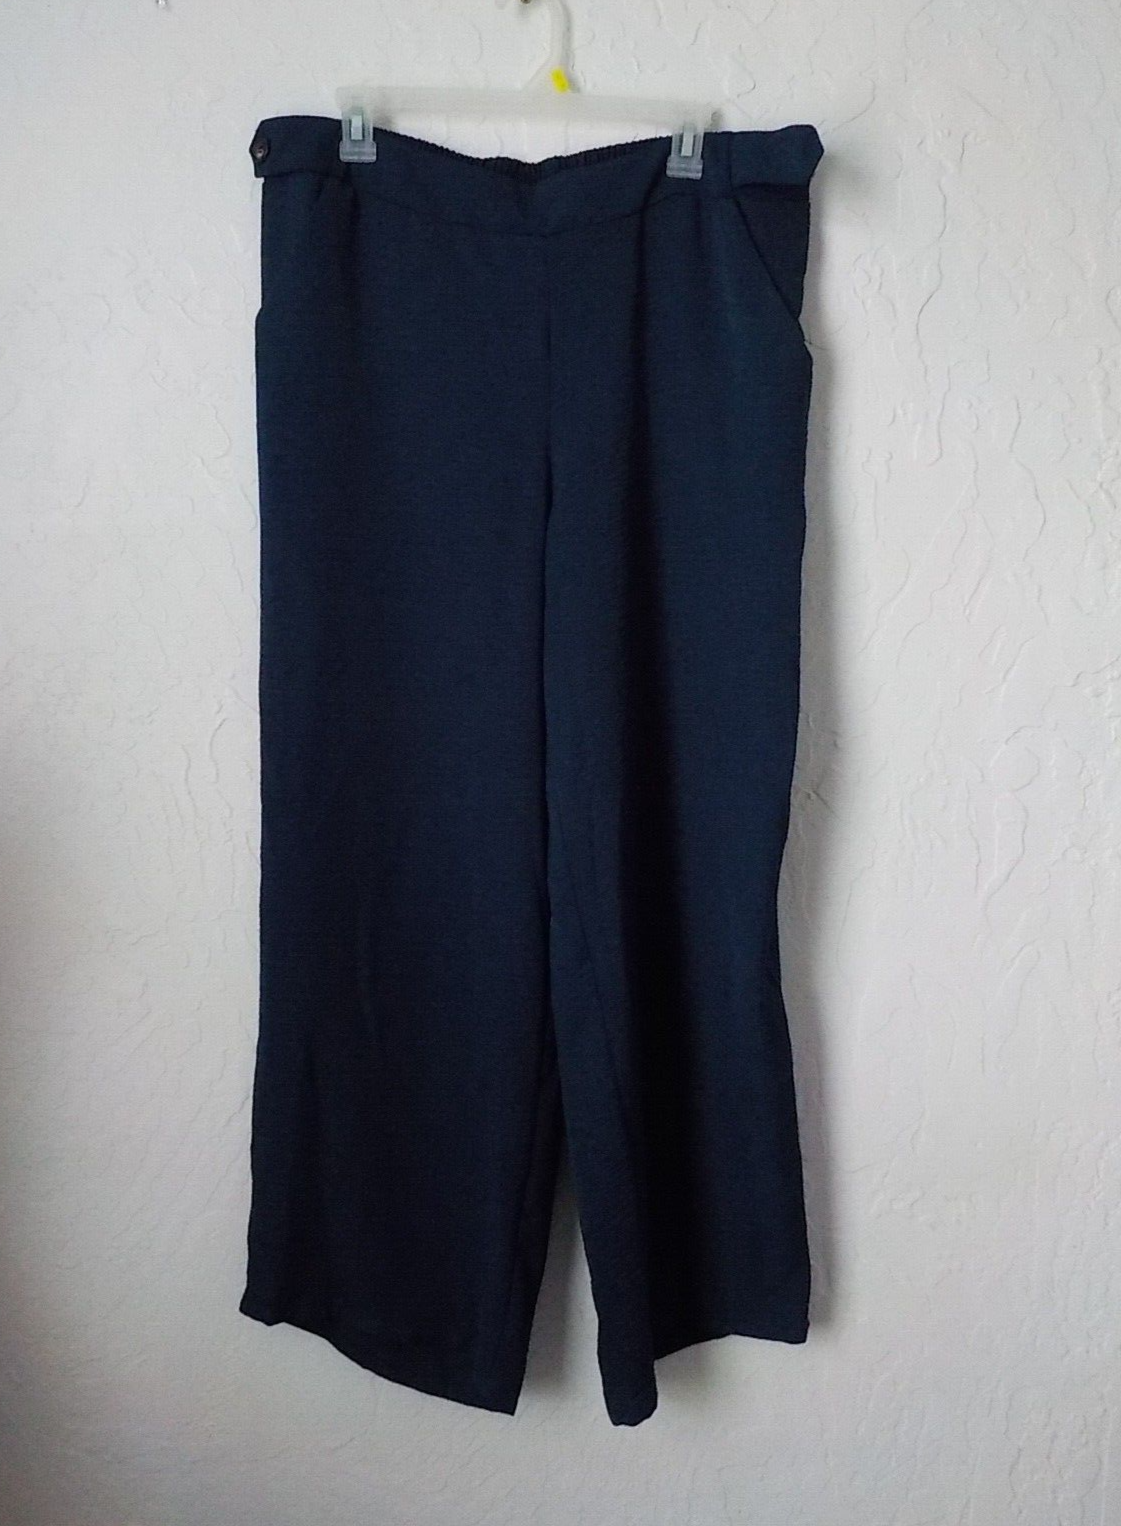 Primary image for IN Studio Blue Casual Light Pants Women size 1X Elastic Waist Pockets Flat Front